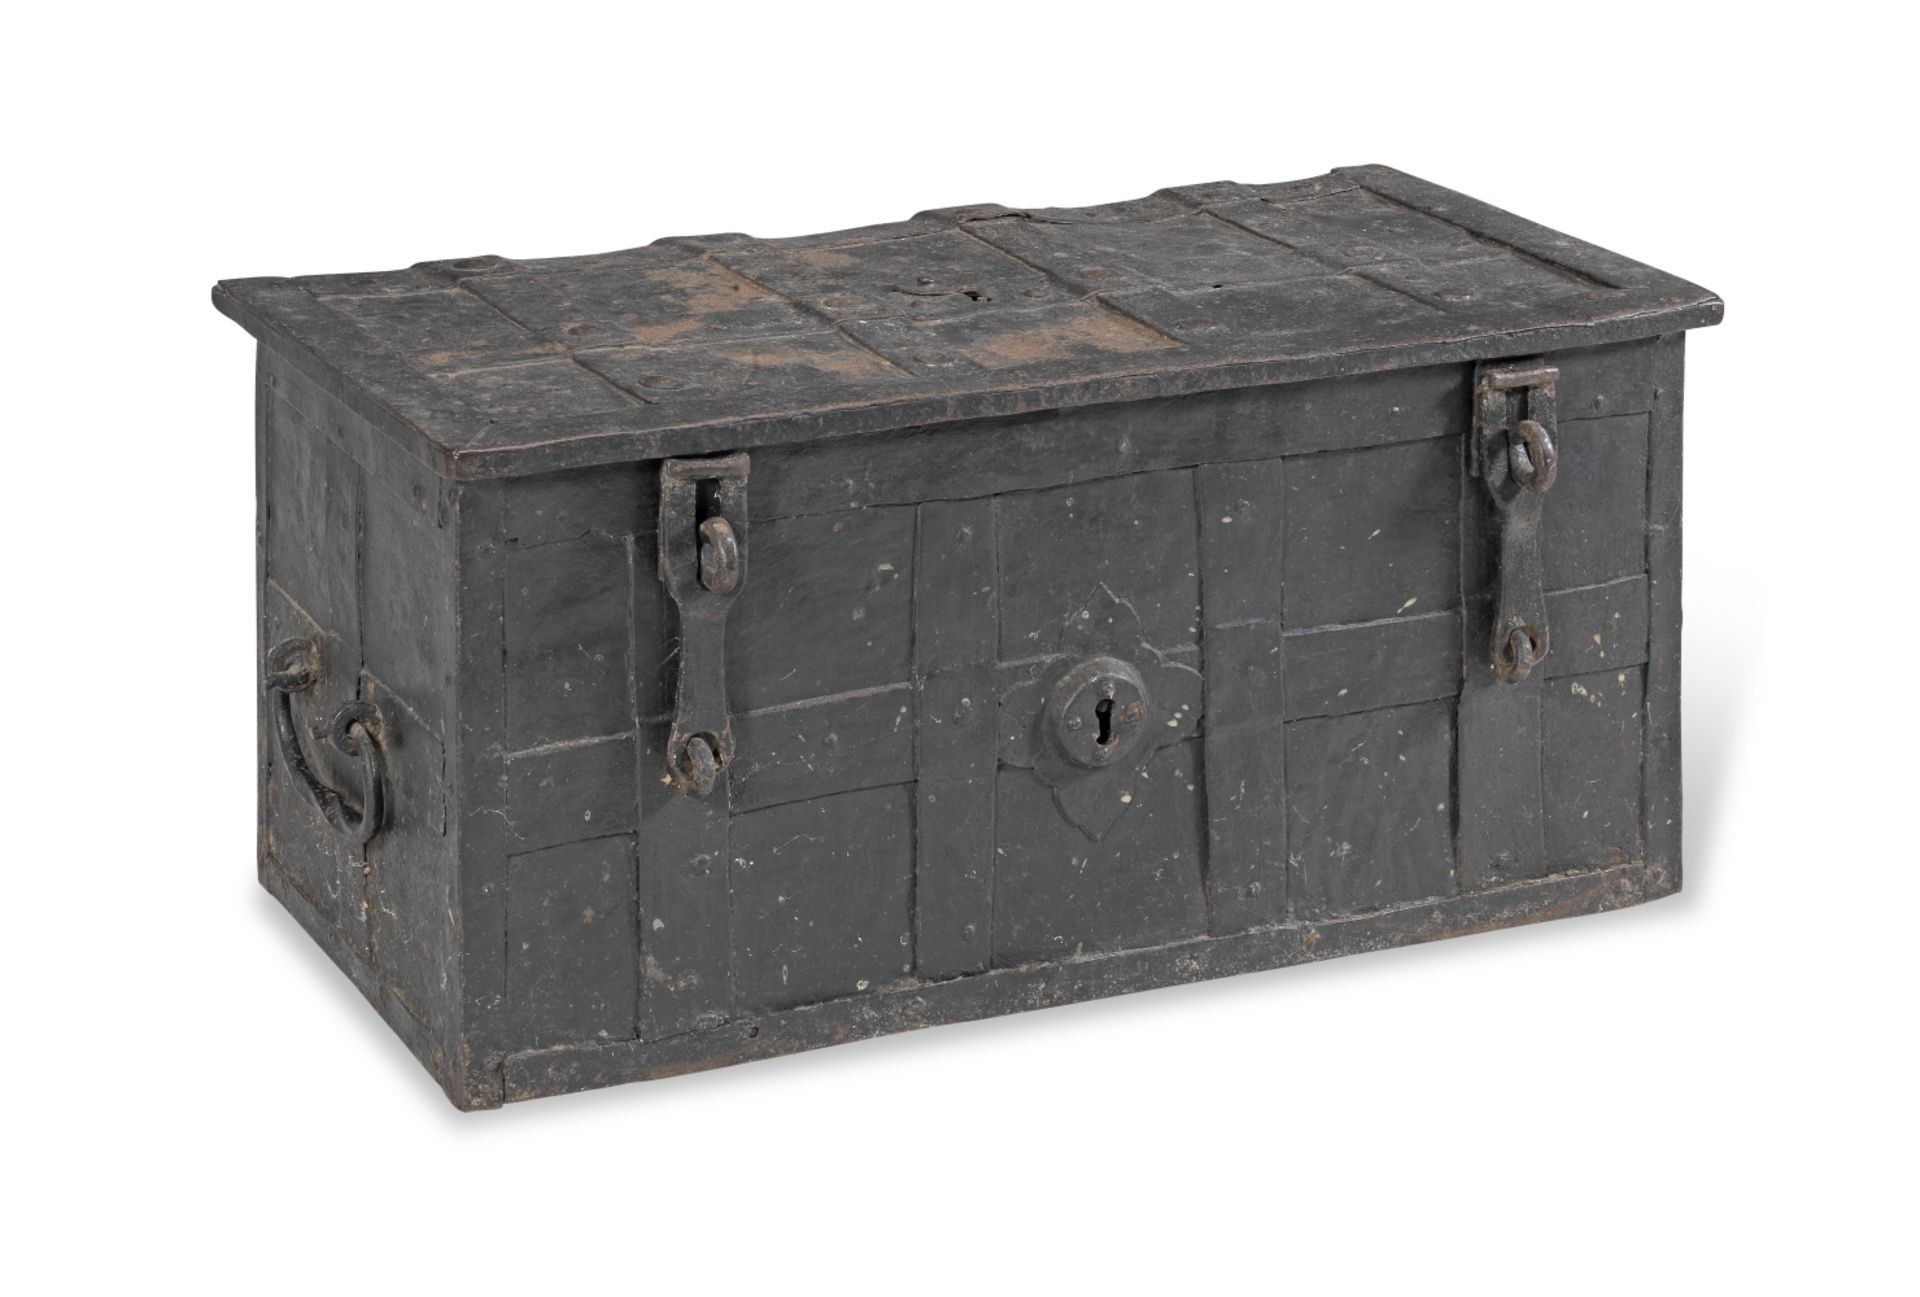 A German 17th century cast-iron strong box